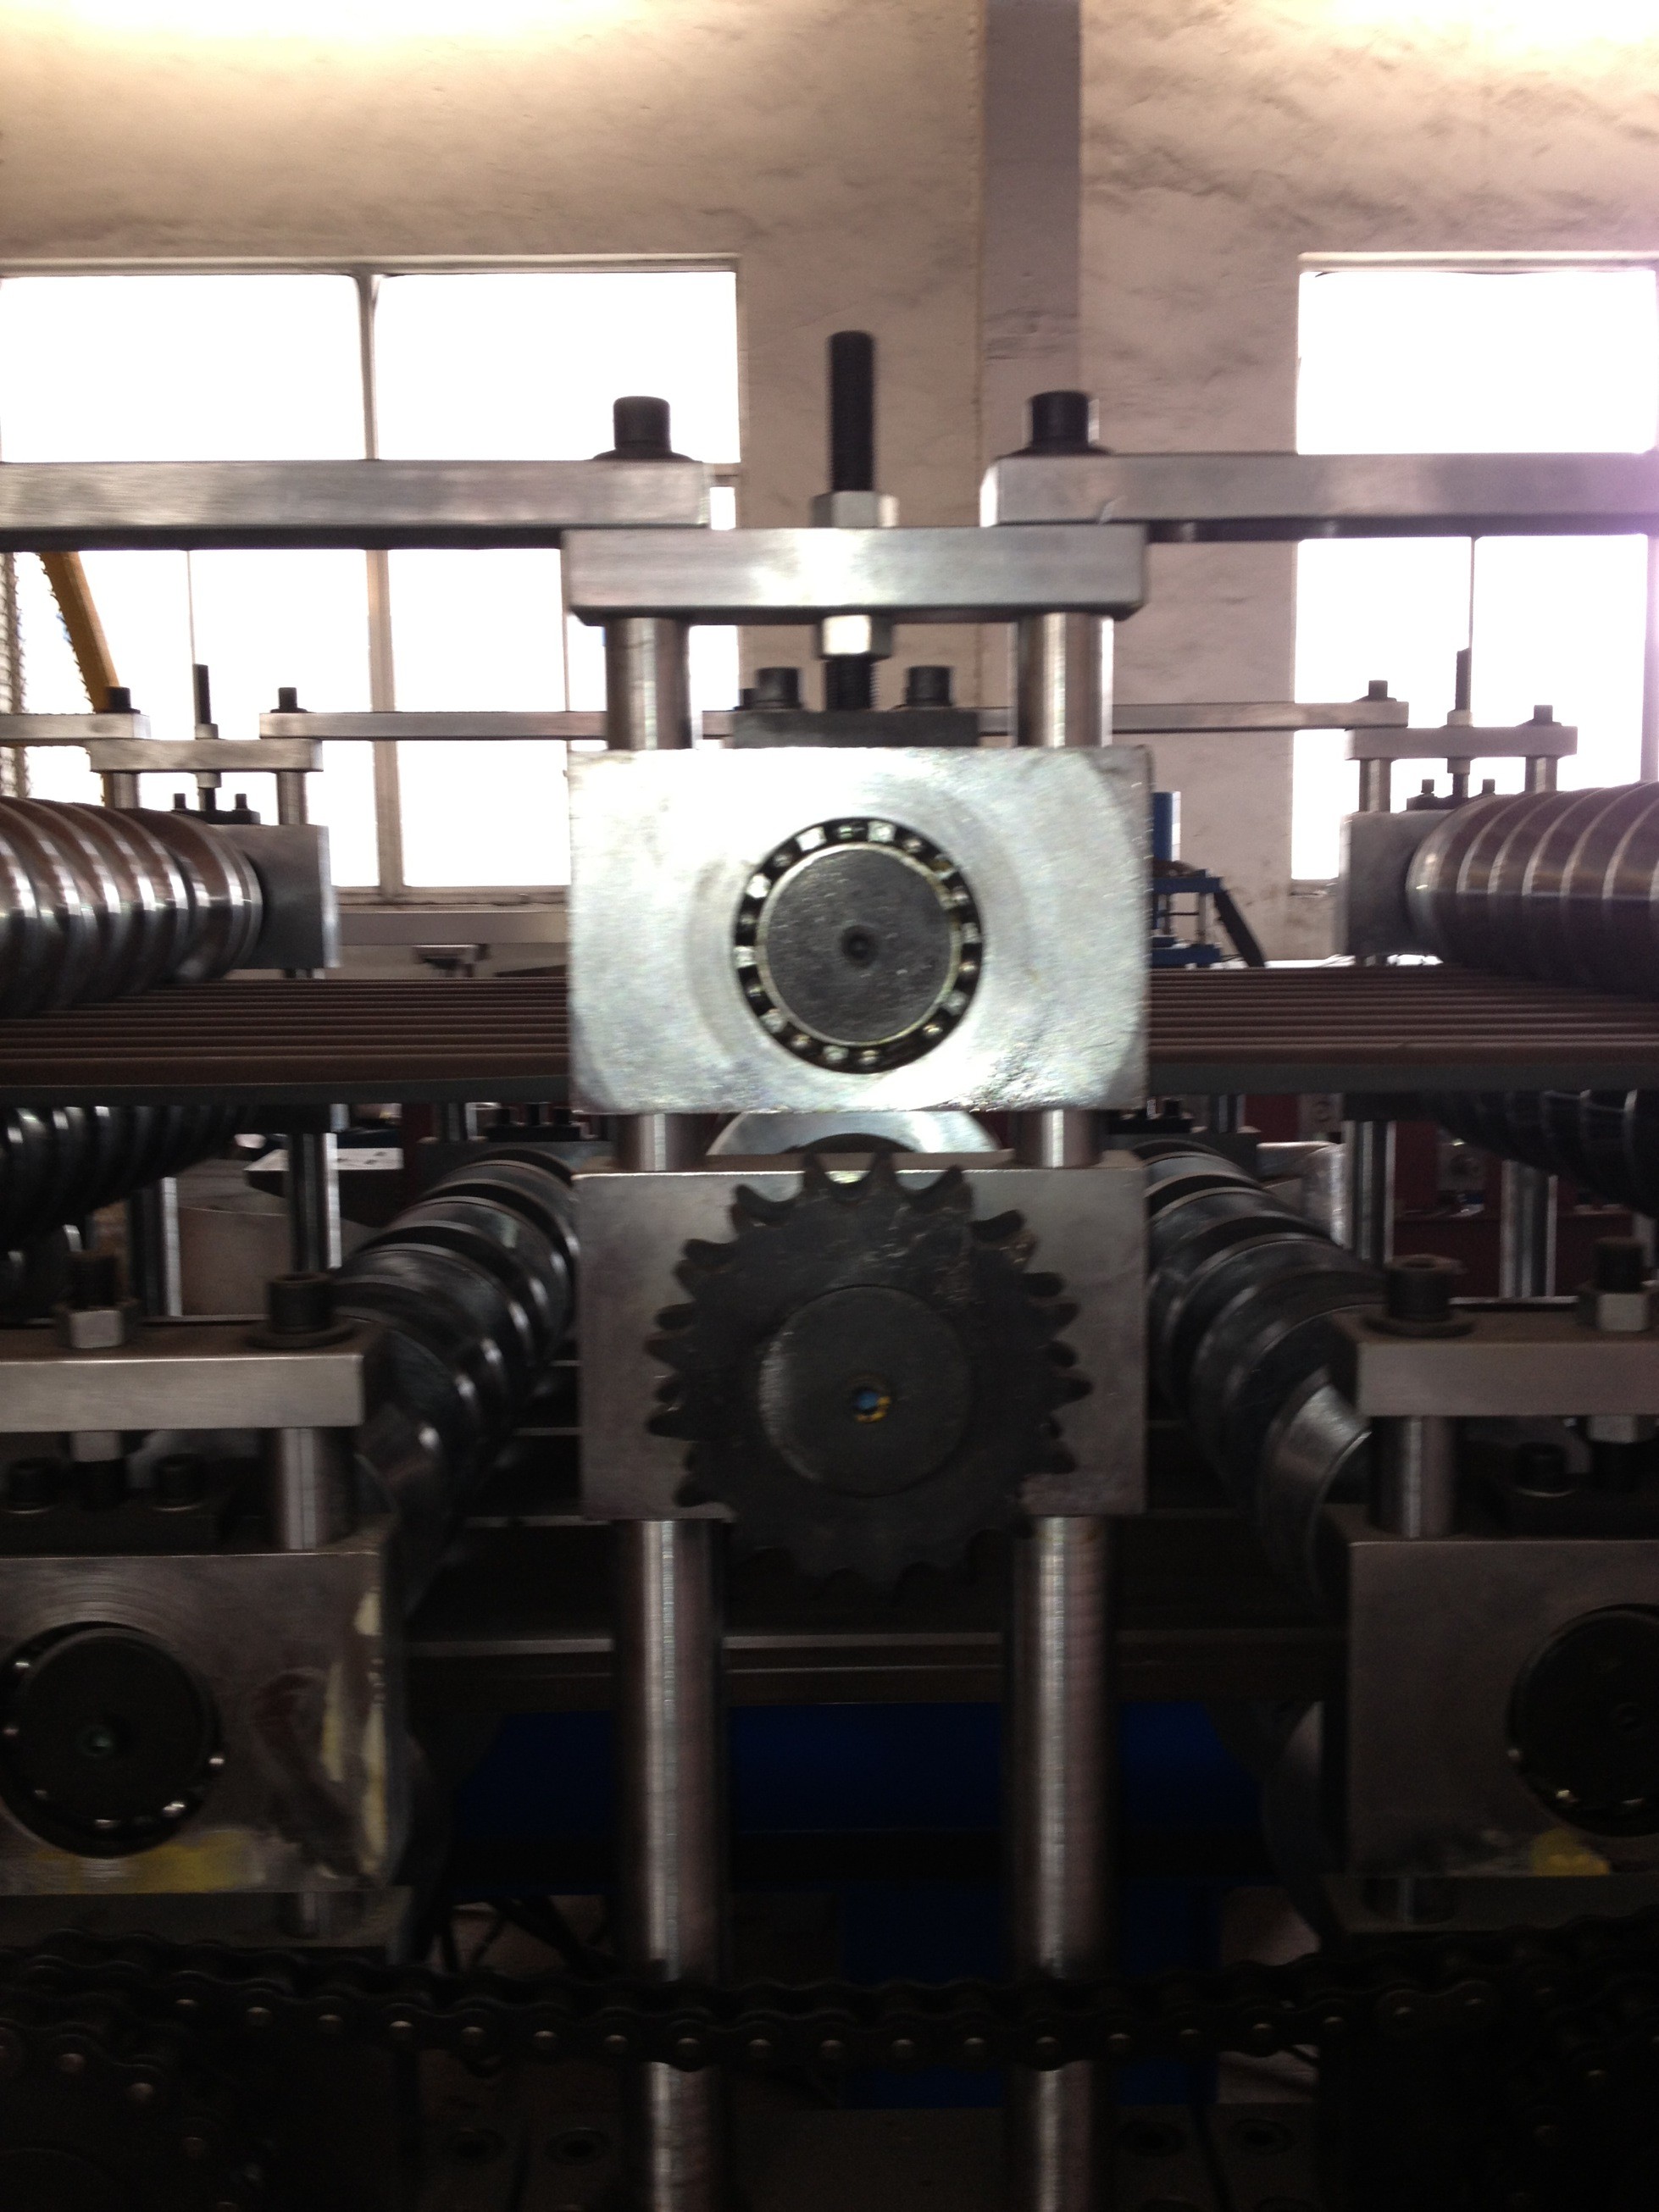 0.3 - 0.8mm  Colour Steel Double Layer Roll Forming Machine High Speed 15m/min Fully Automatic